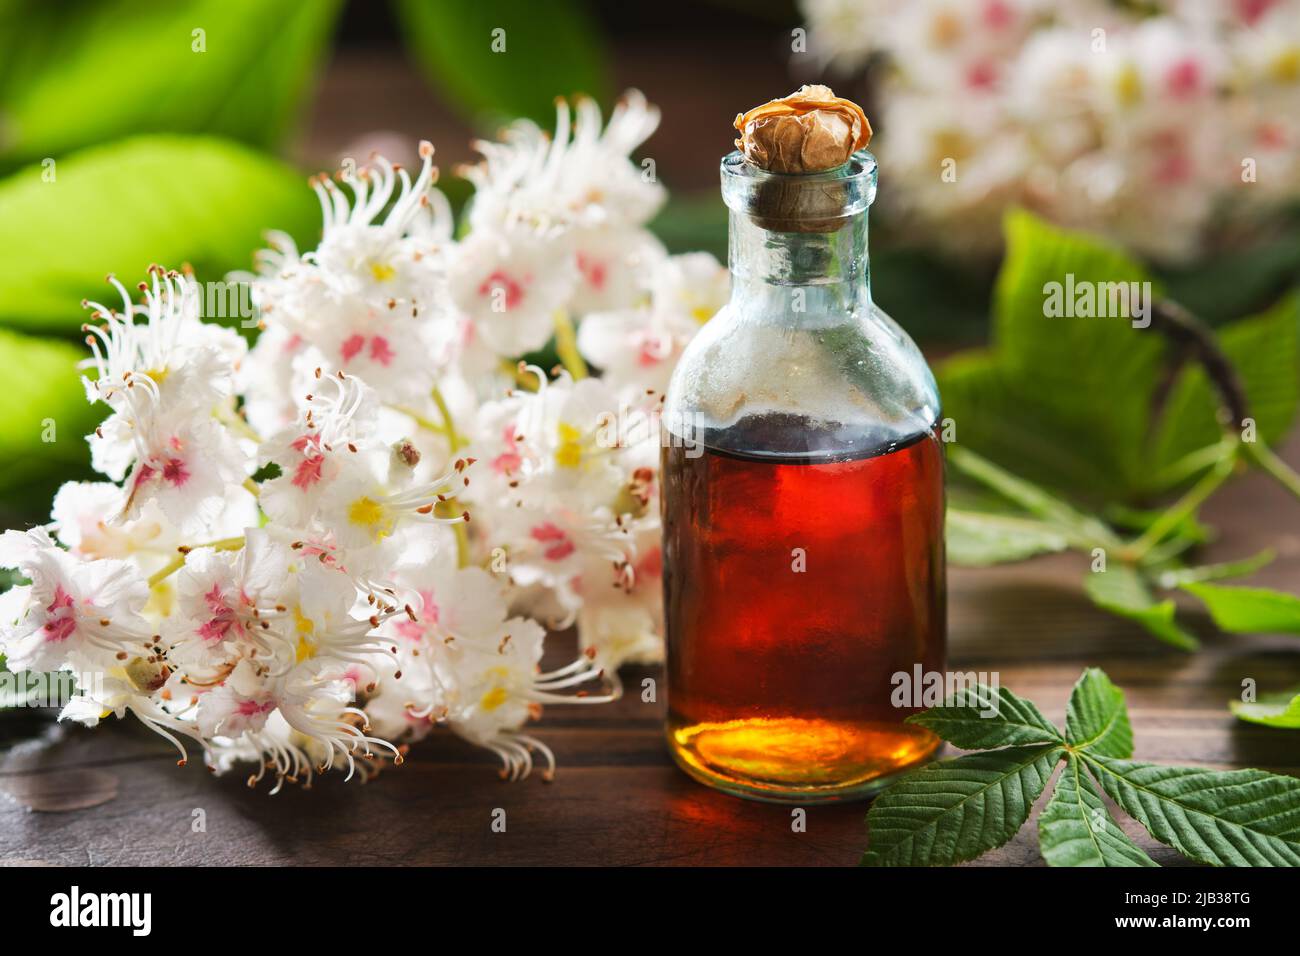 Bottle of infusion or tincture of blossom and leaves of chestnuts tree. Blossoming horse chestnut twigs and green spring leaves. Alternative herbal me Stock Photo